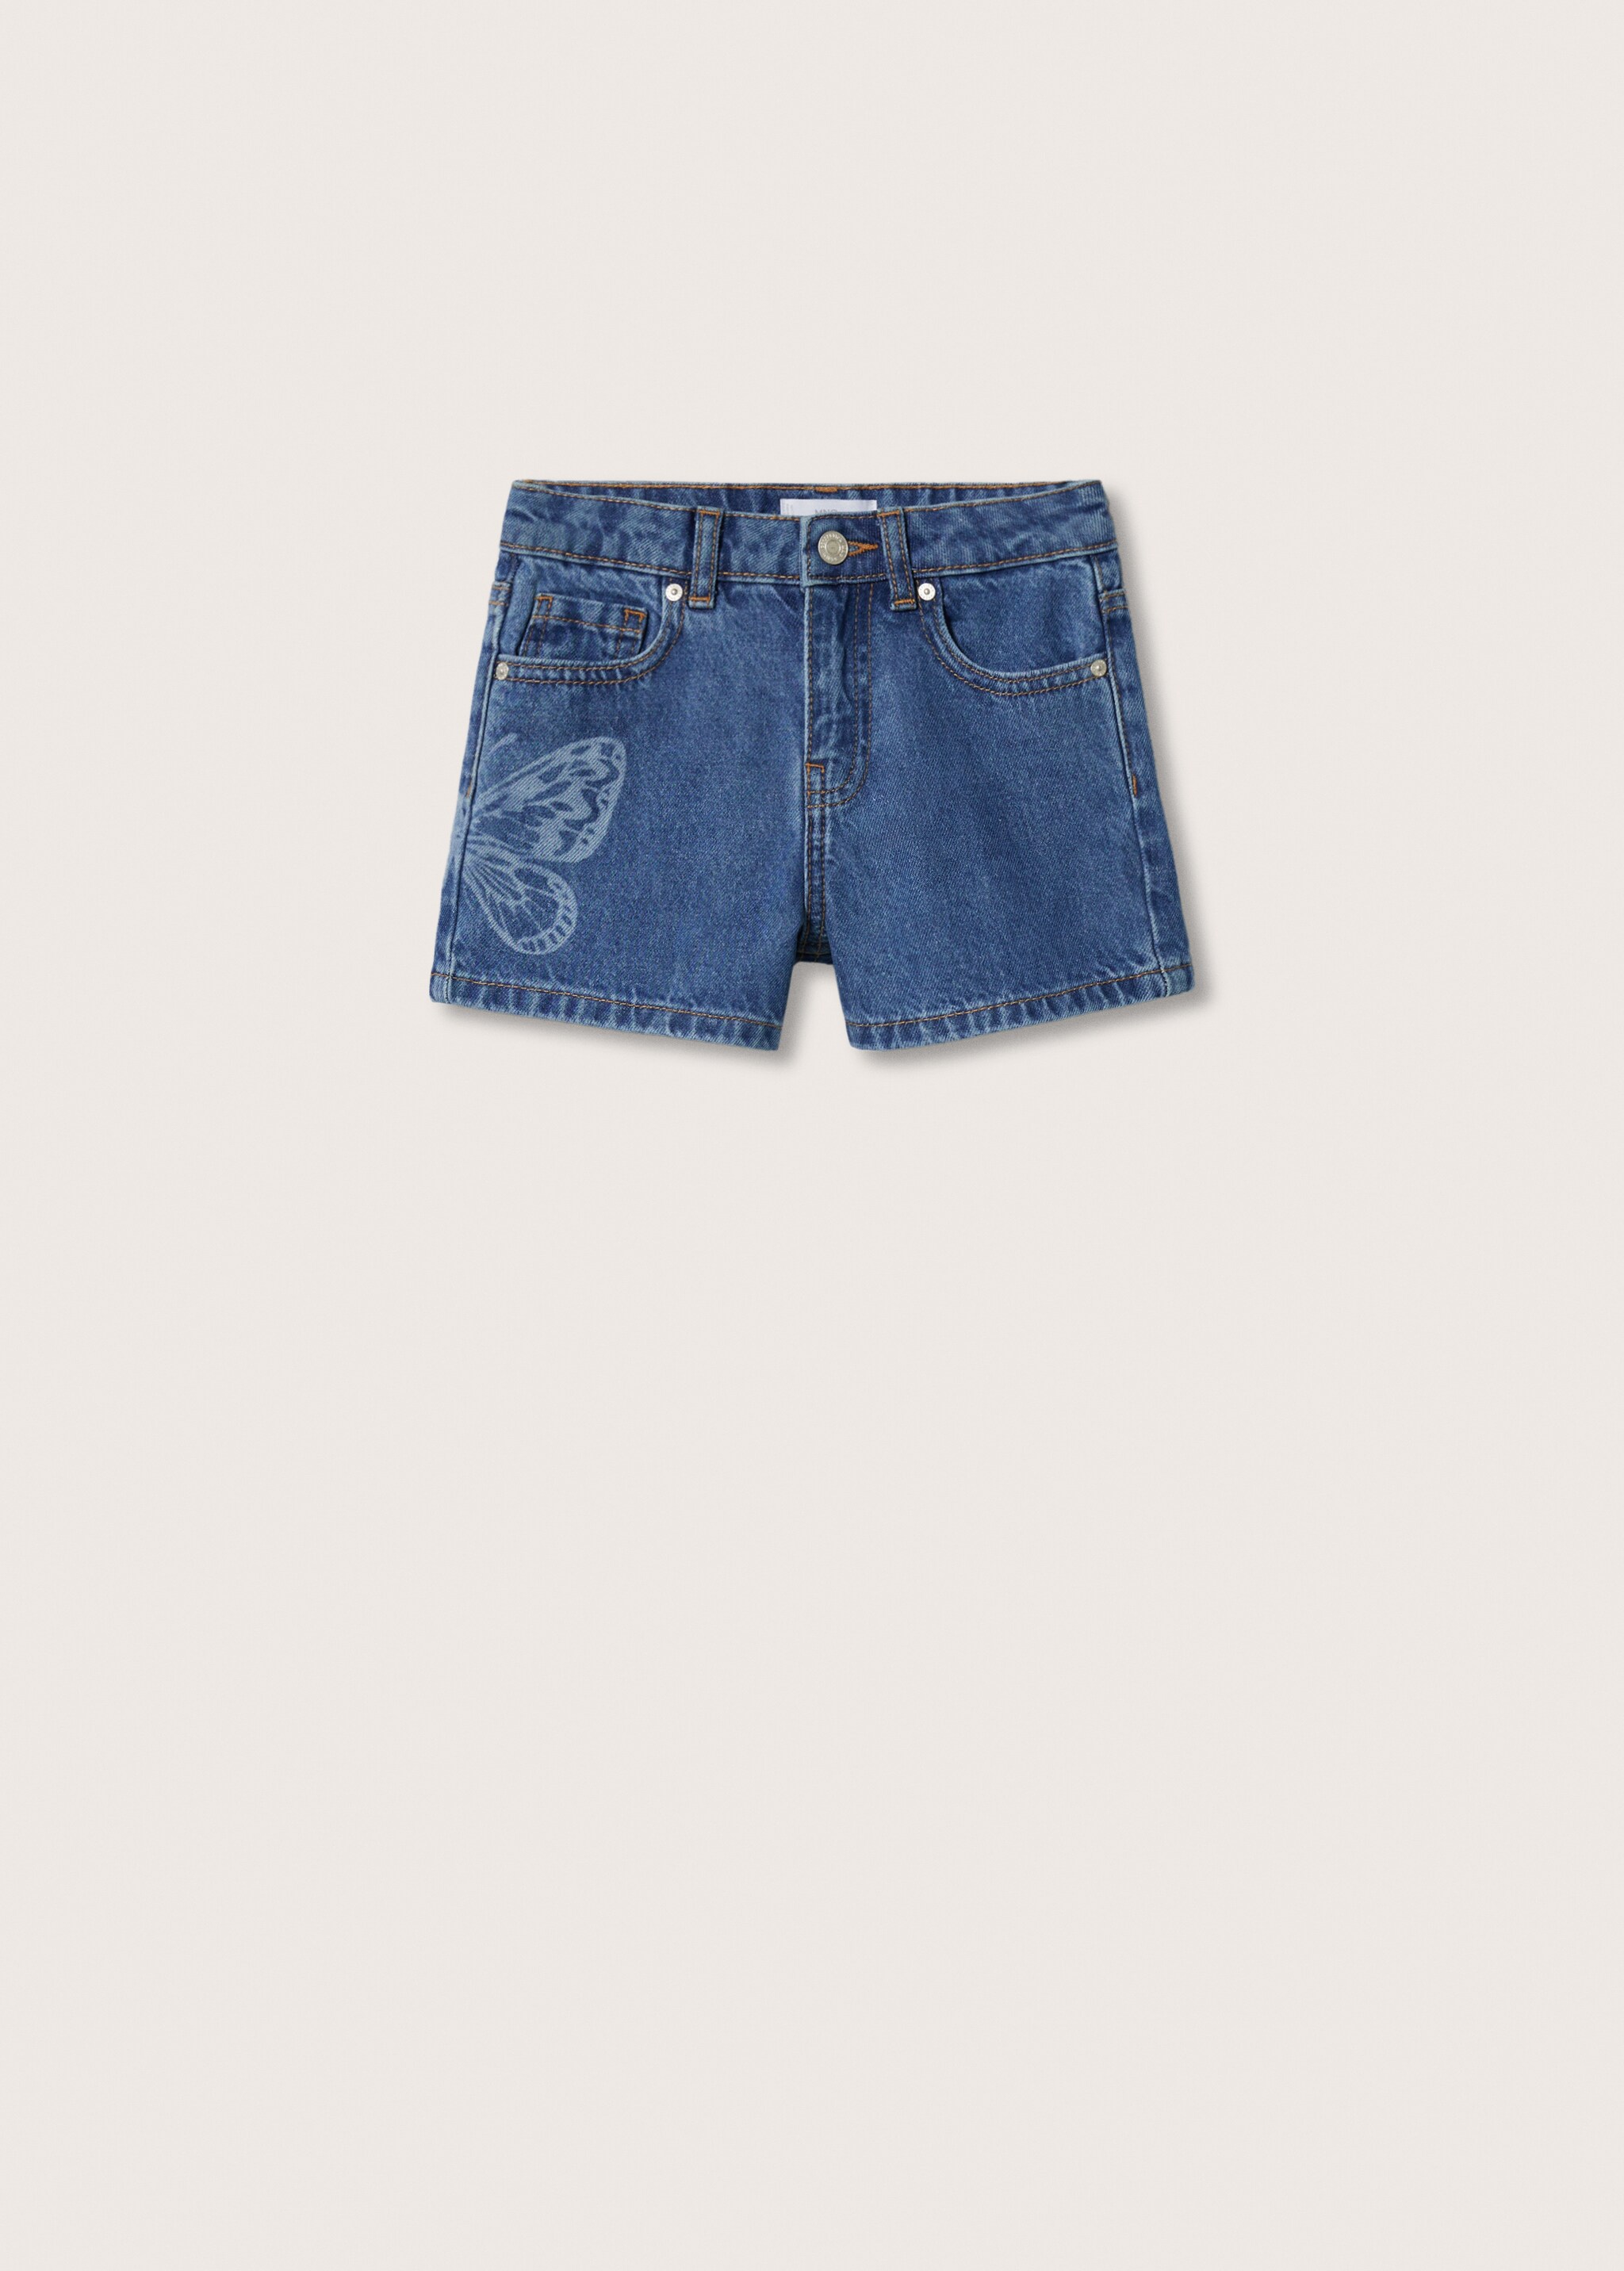 Butterfly denim shorts - Article without model